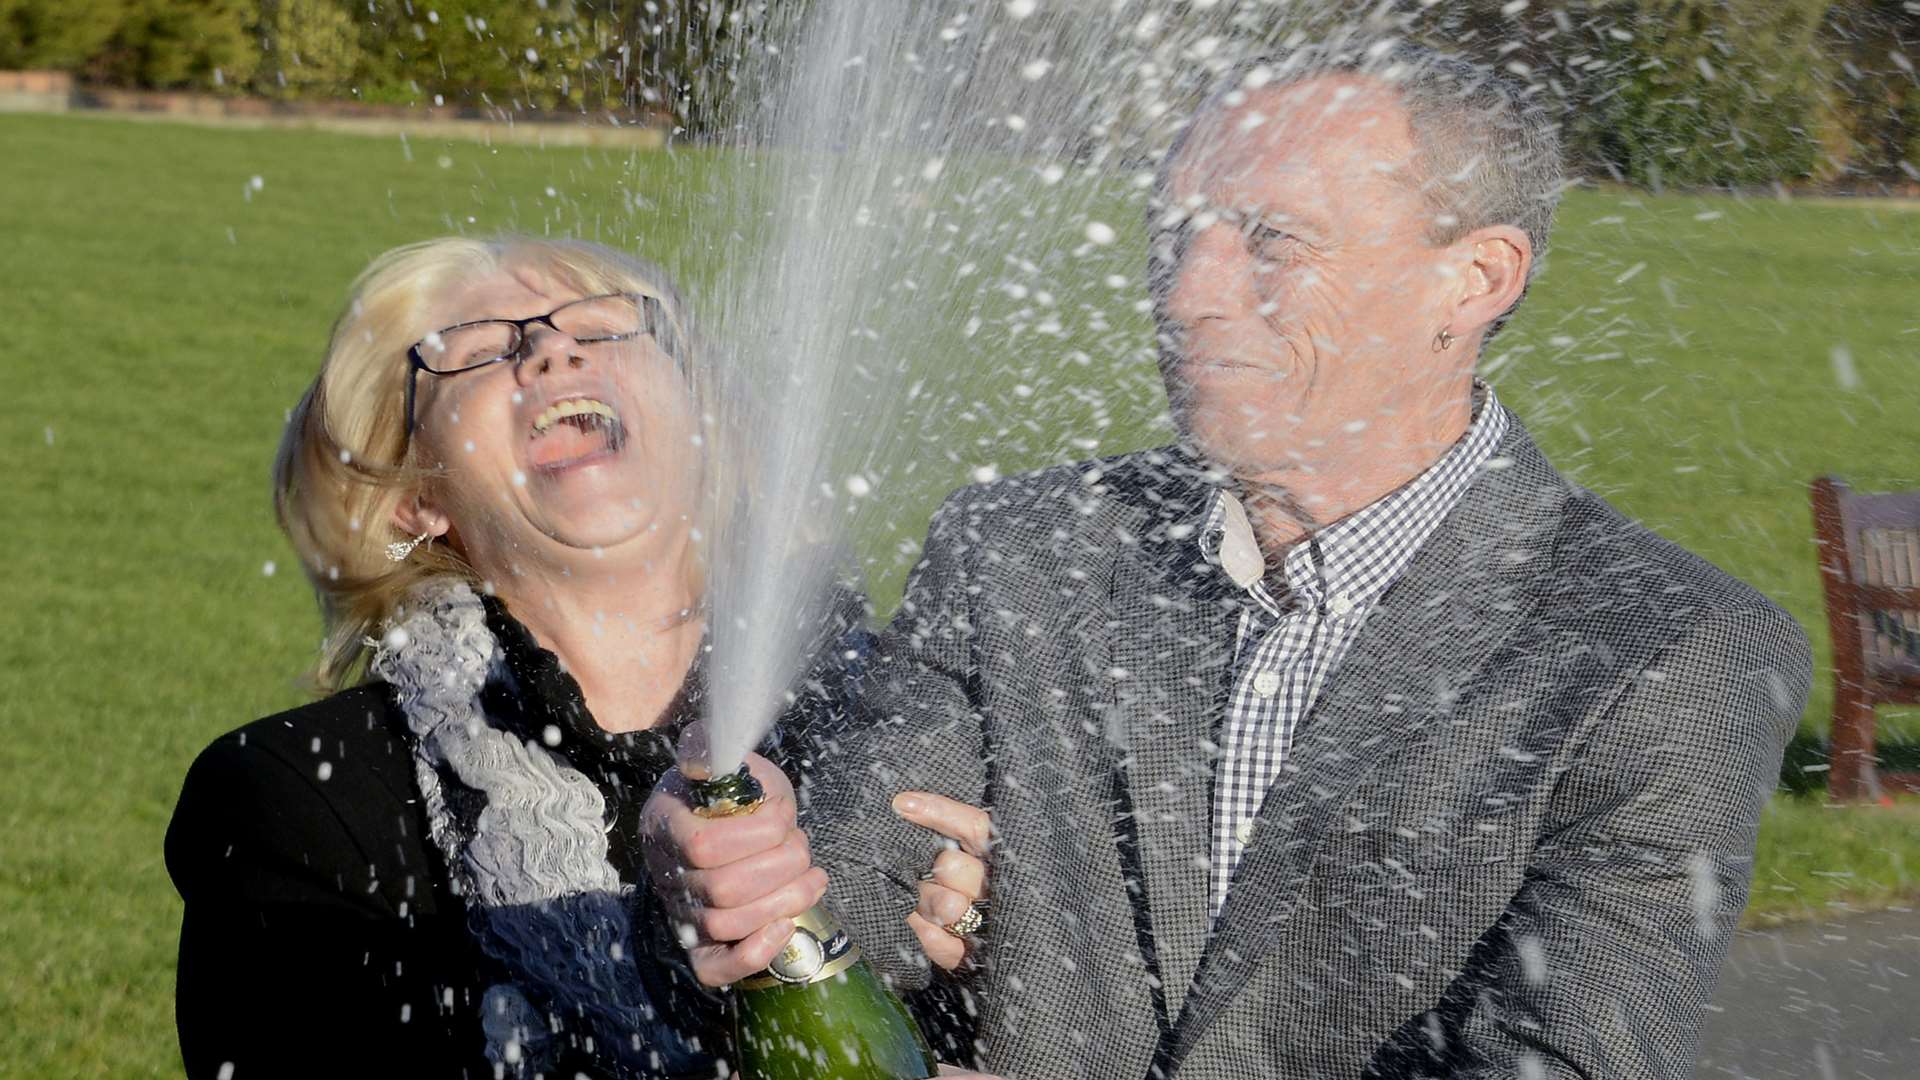 Marjorie and Alan celebrate their Lotto win